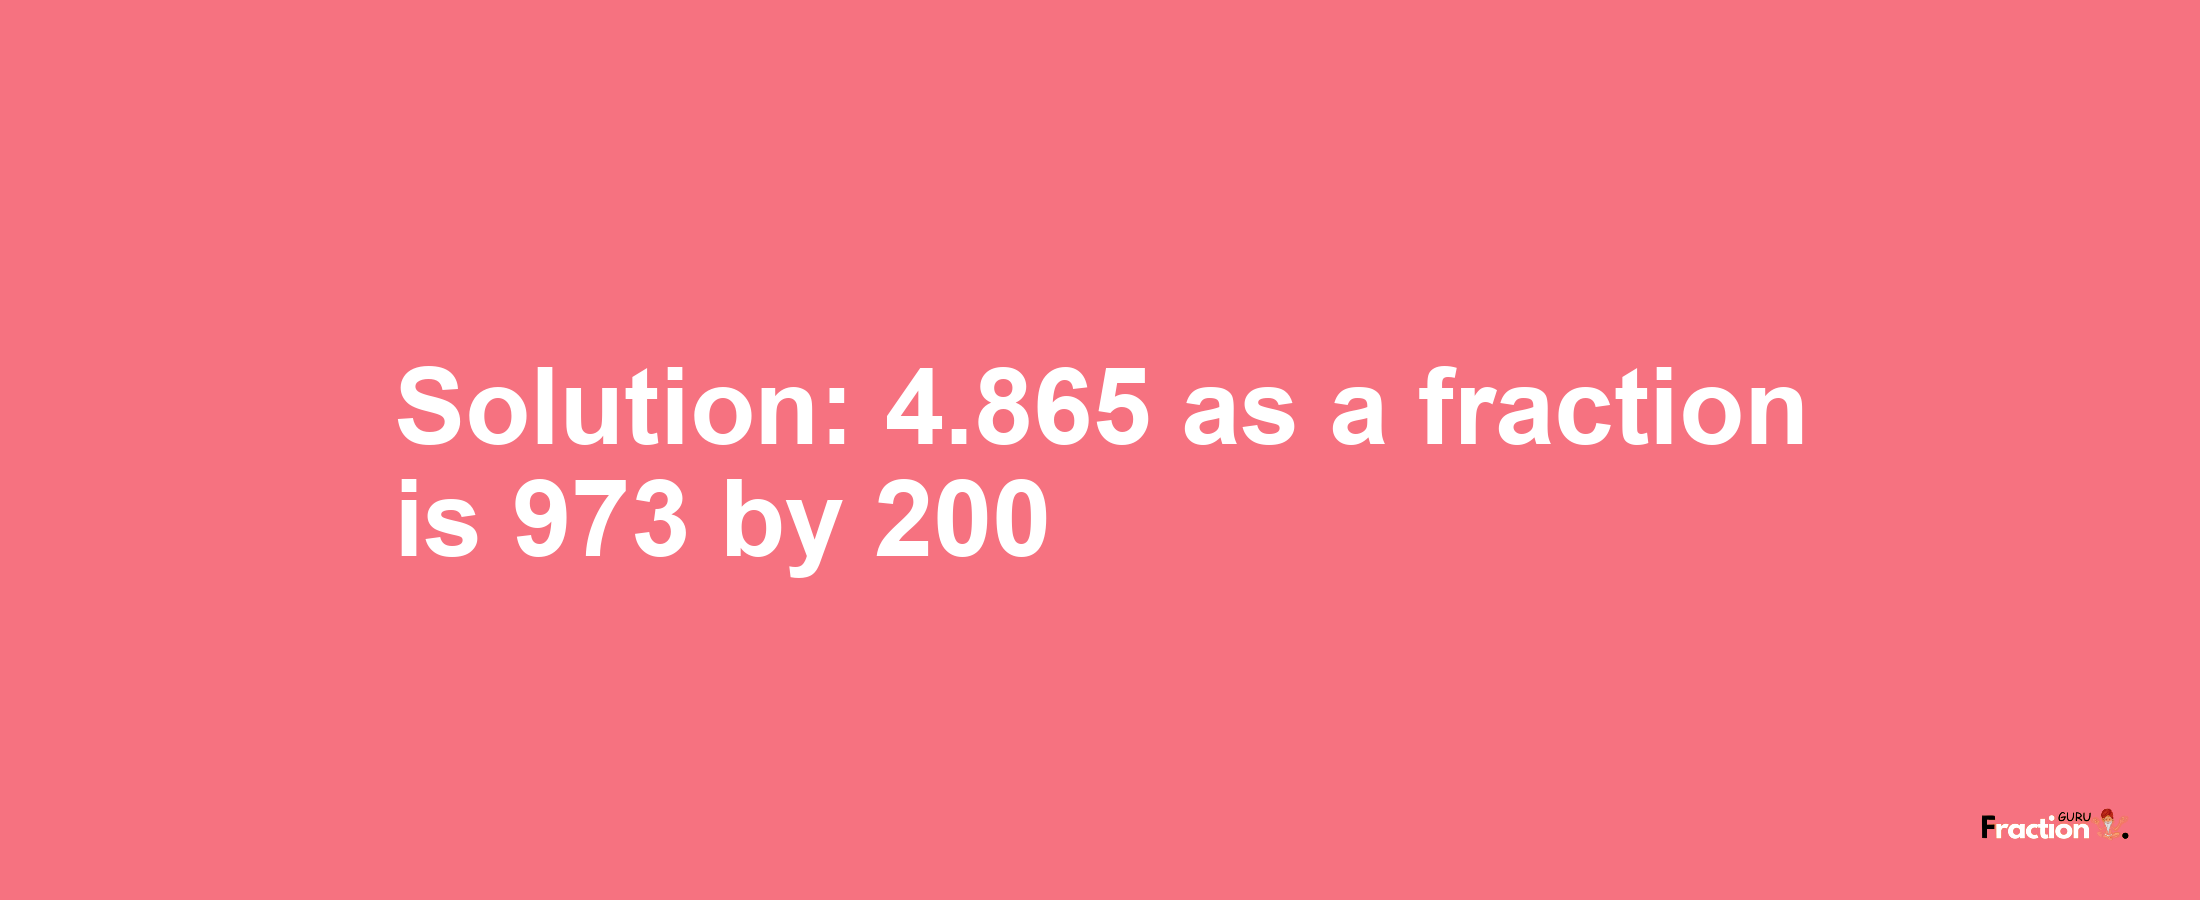 Solution:4.865 as a fraction is 973/200